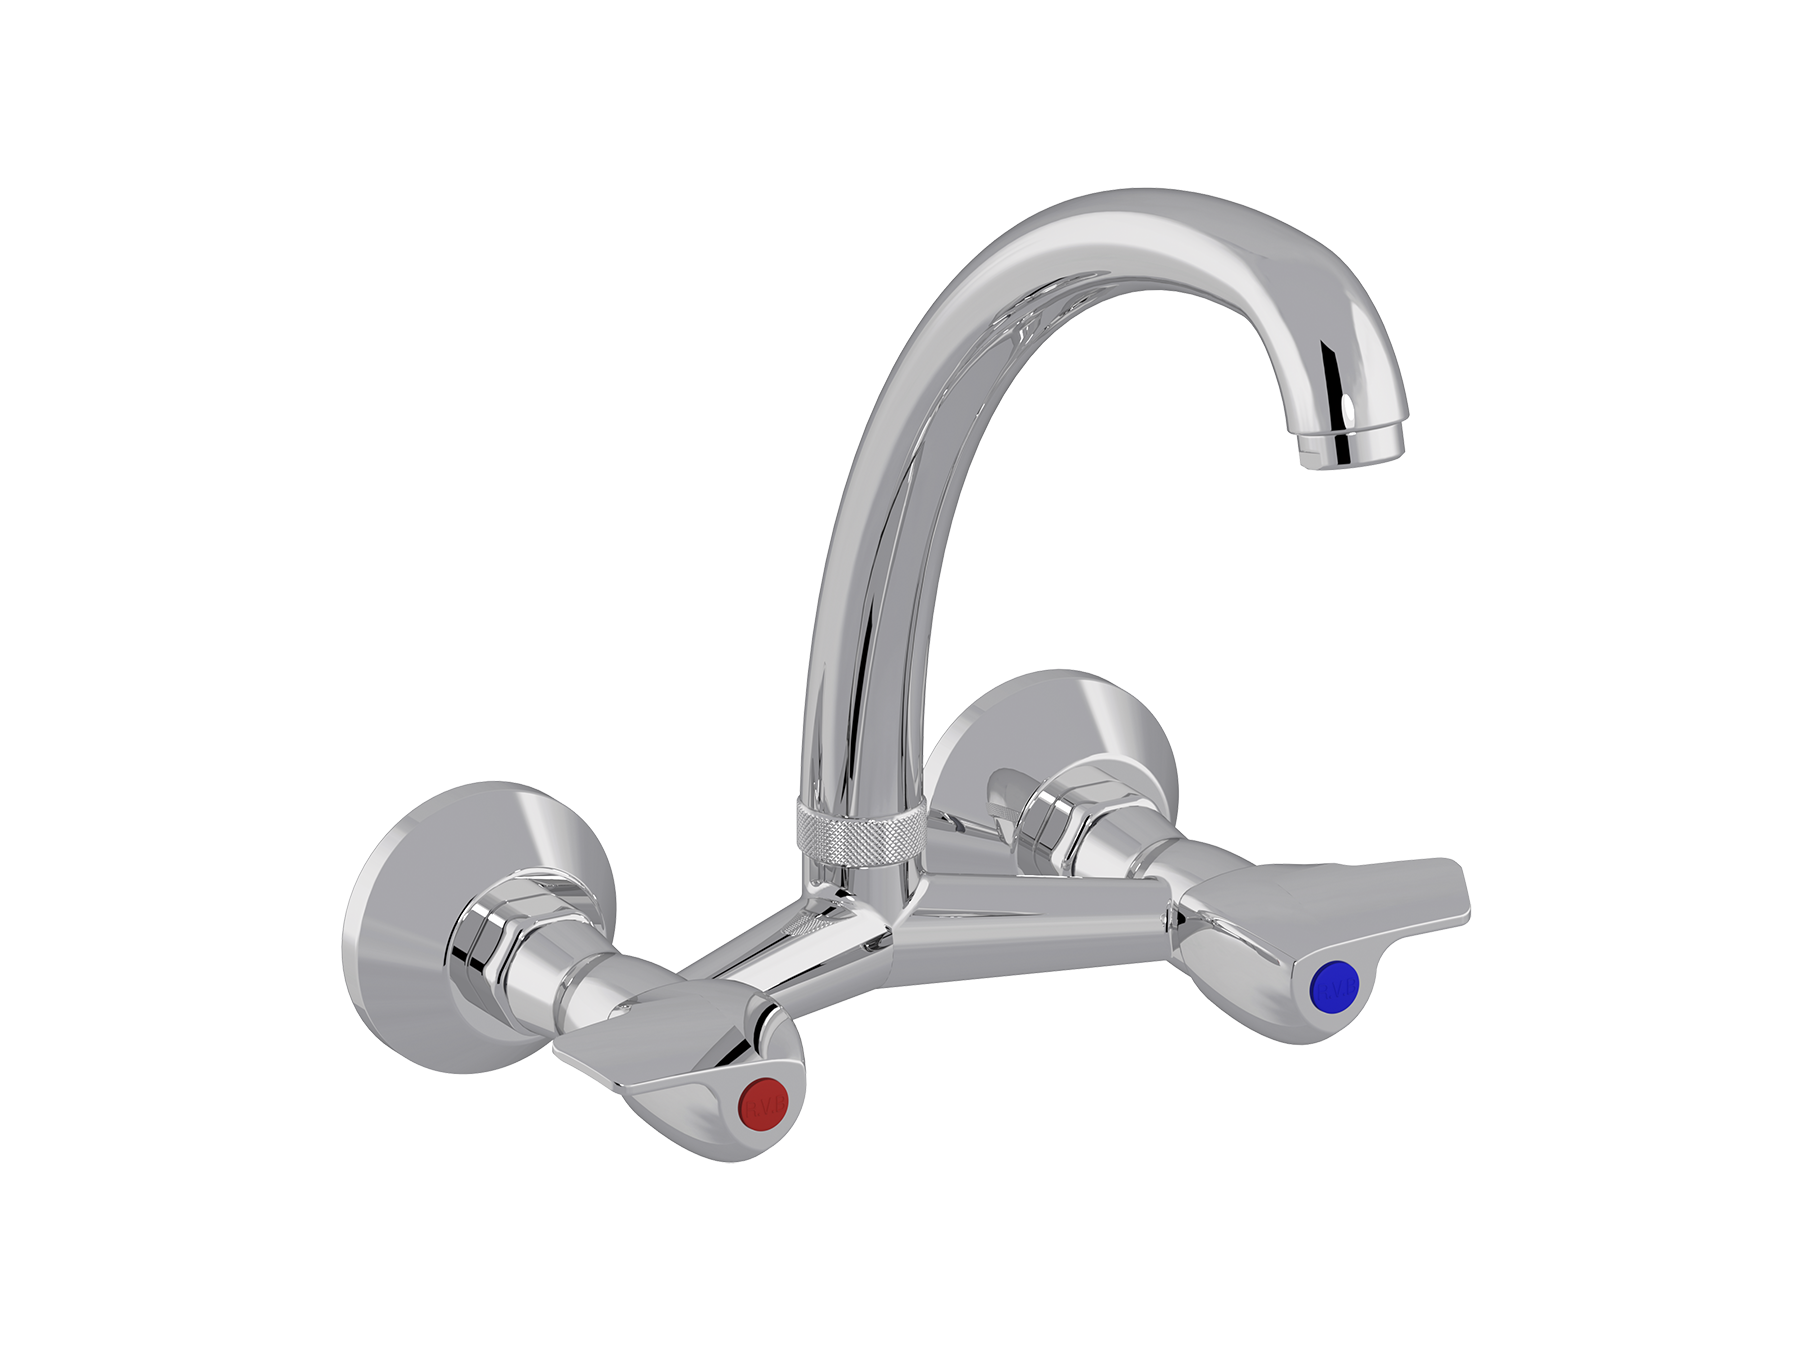 Wall-mounted kitchen mixer, spout above